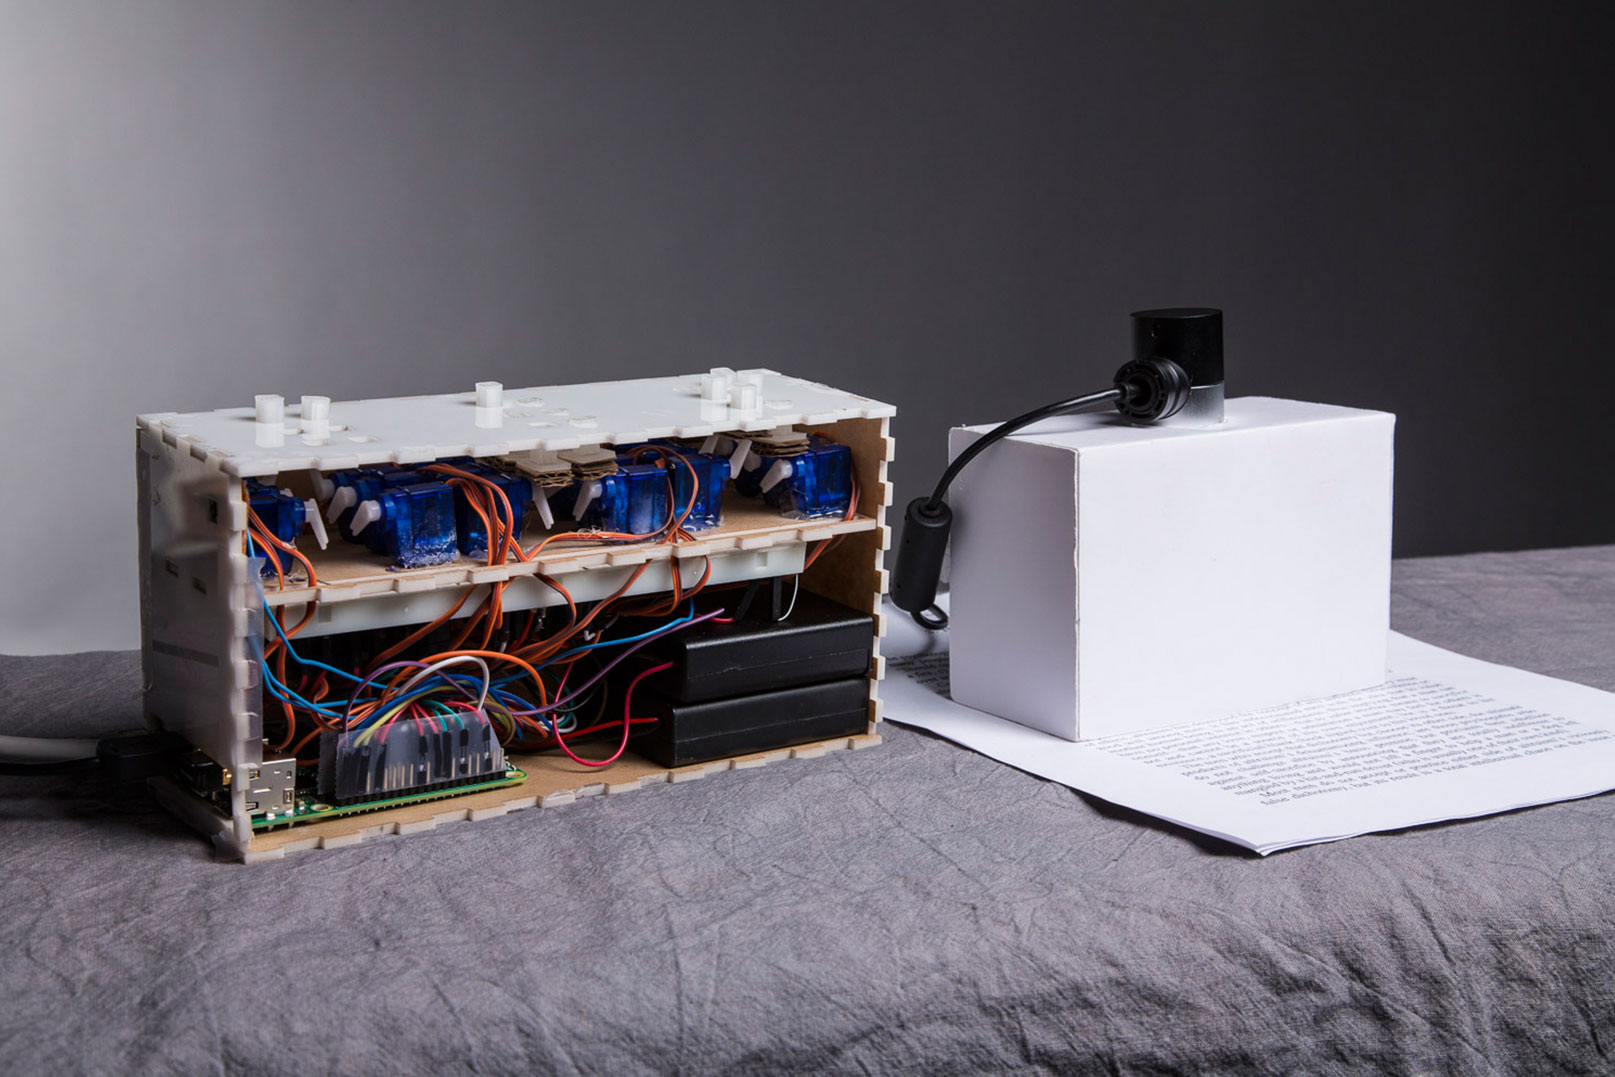 Photo of an acrylic box with three groups of six pins on the top and an array of wires inside, and a scanner crafted out of cardboard sitting on a piece of paper with typed text on it